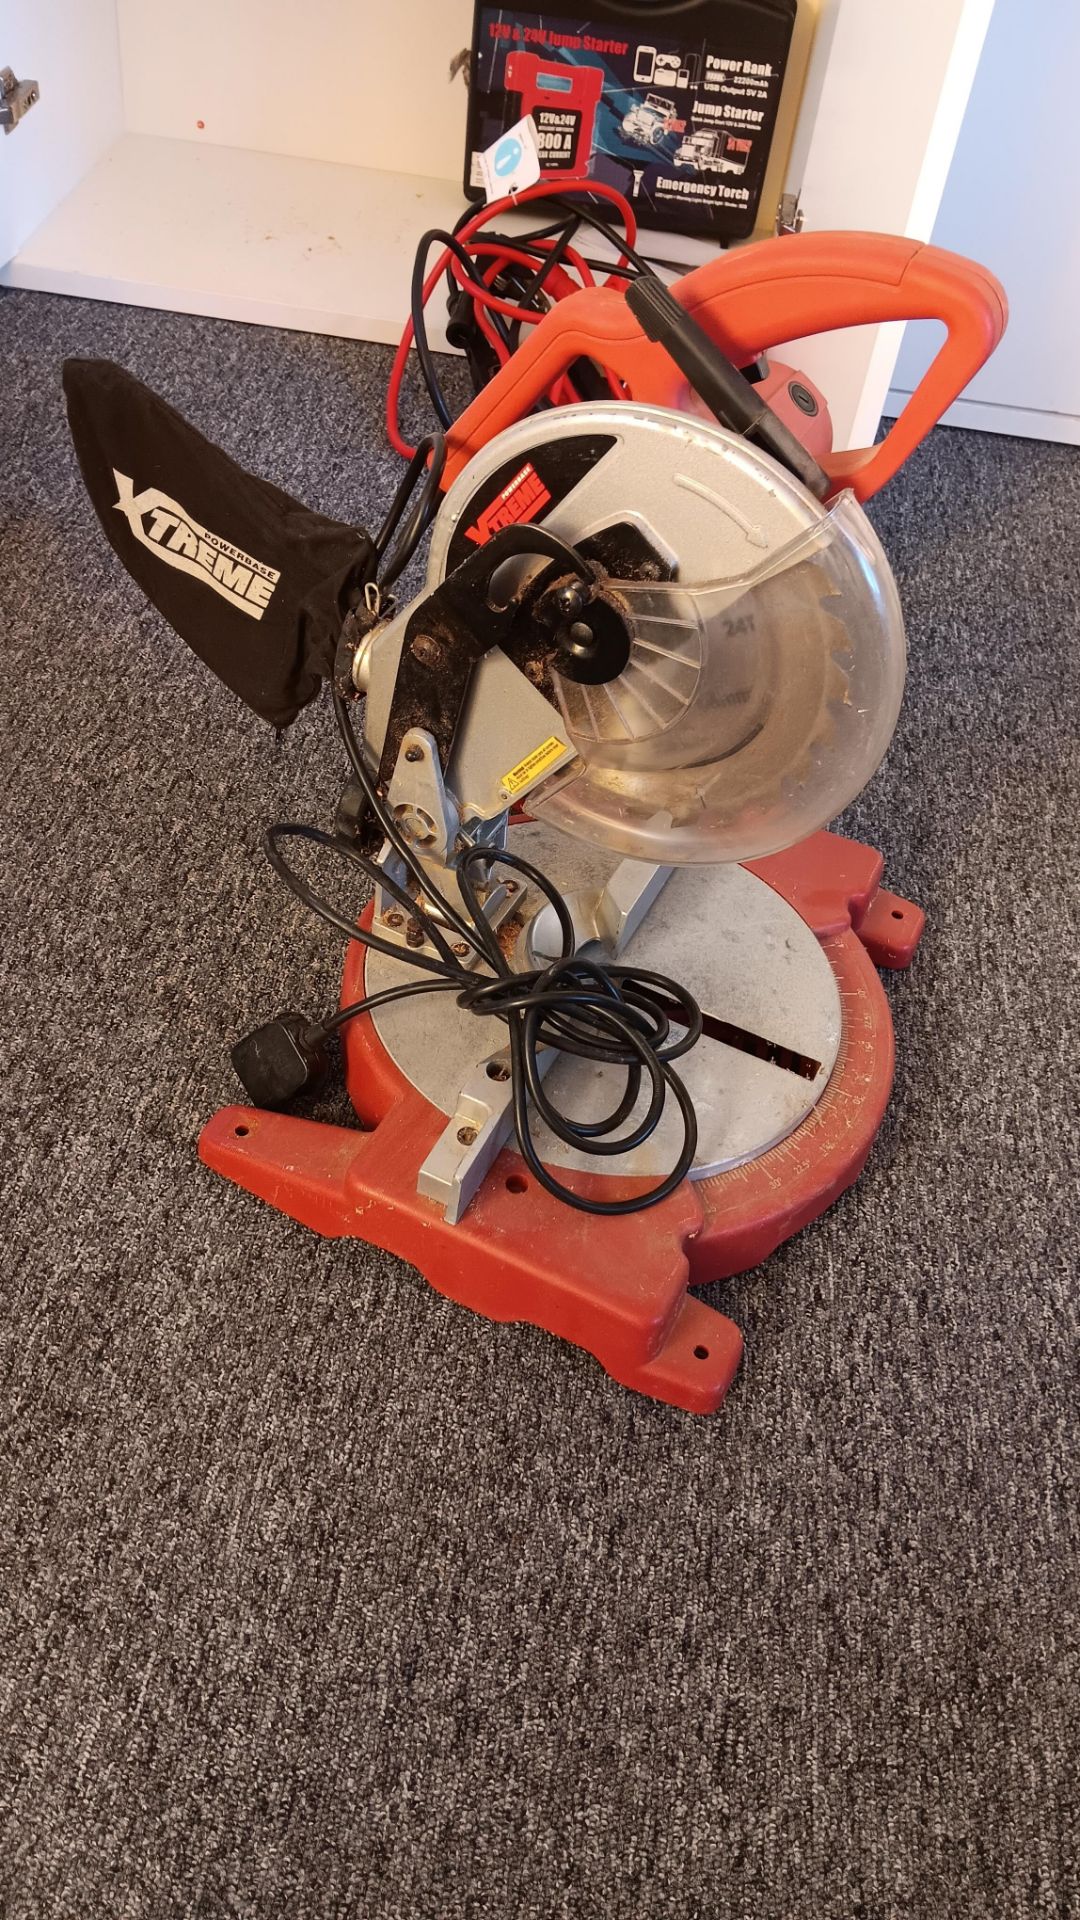 Challenge XTreme PSM210J1 1,200w 210mm compound mitre saw, serial number JF67W49, 240v – Located - Image 2 of 3